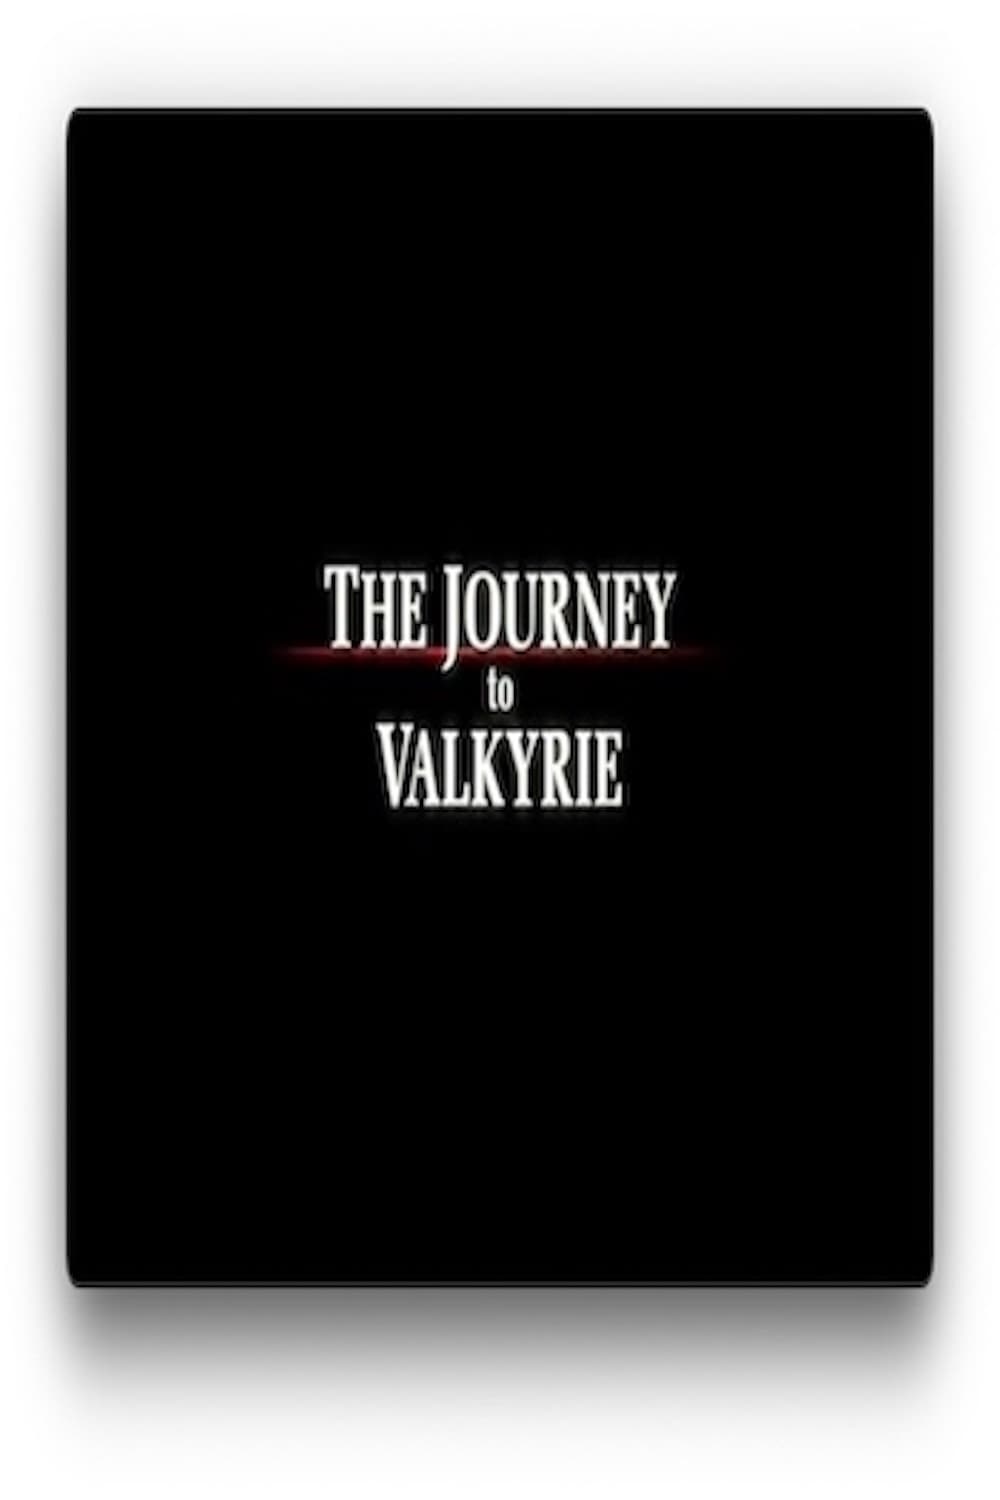 The Journey to Valkyrie